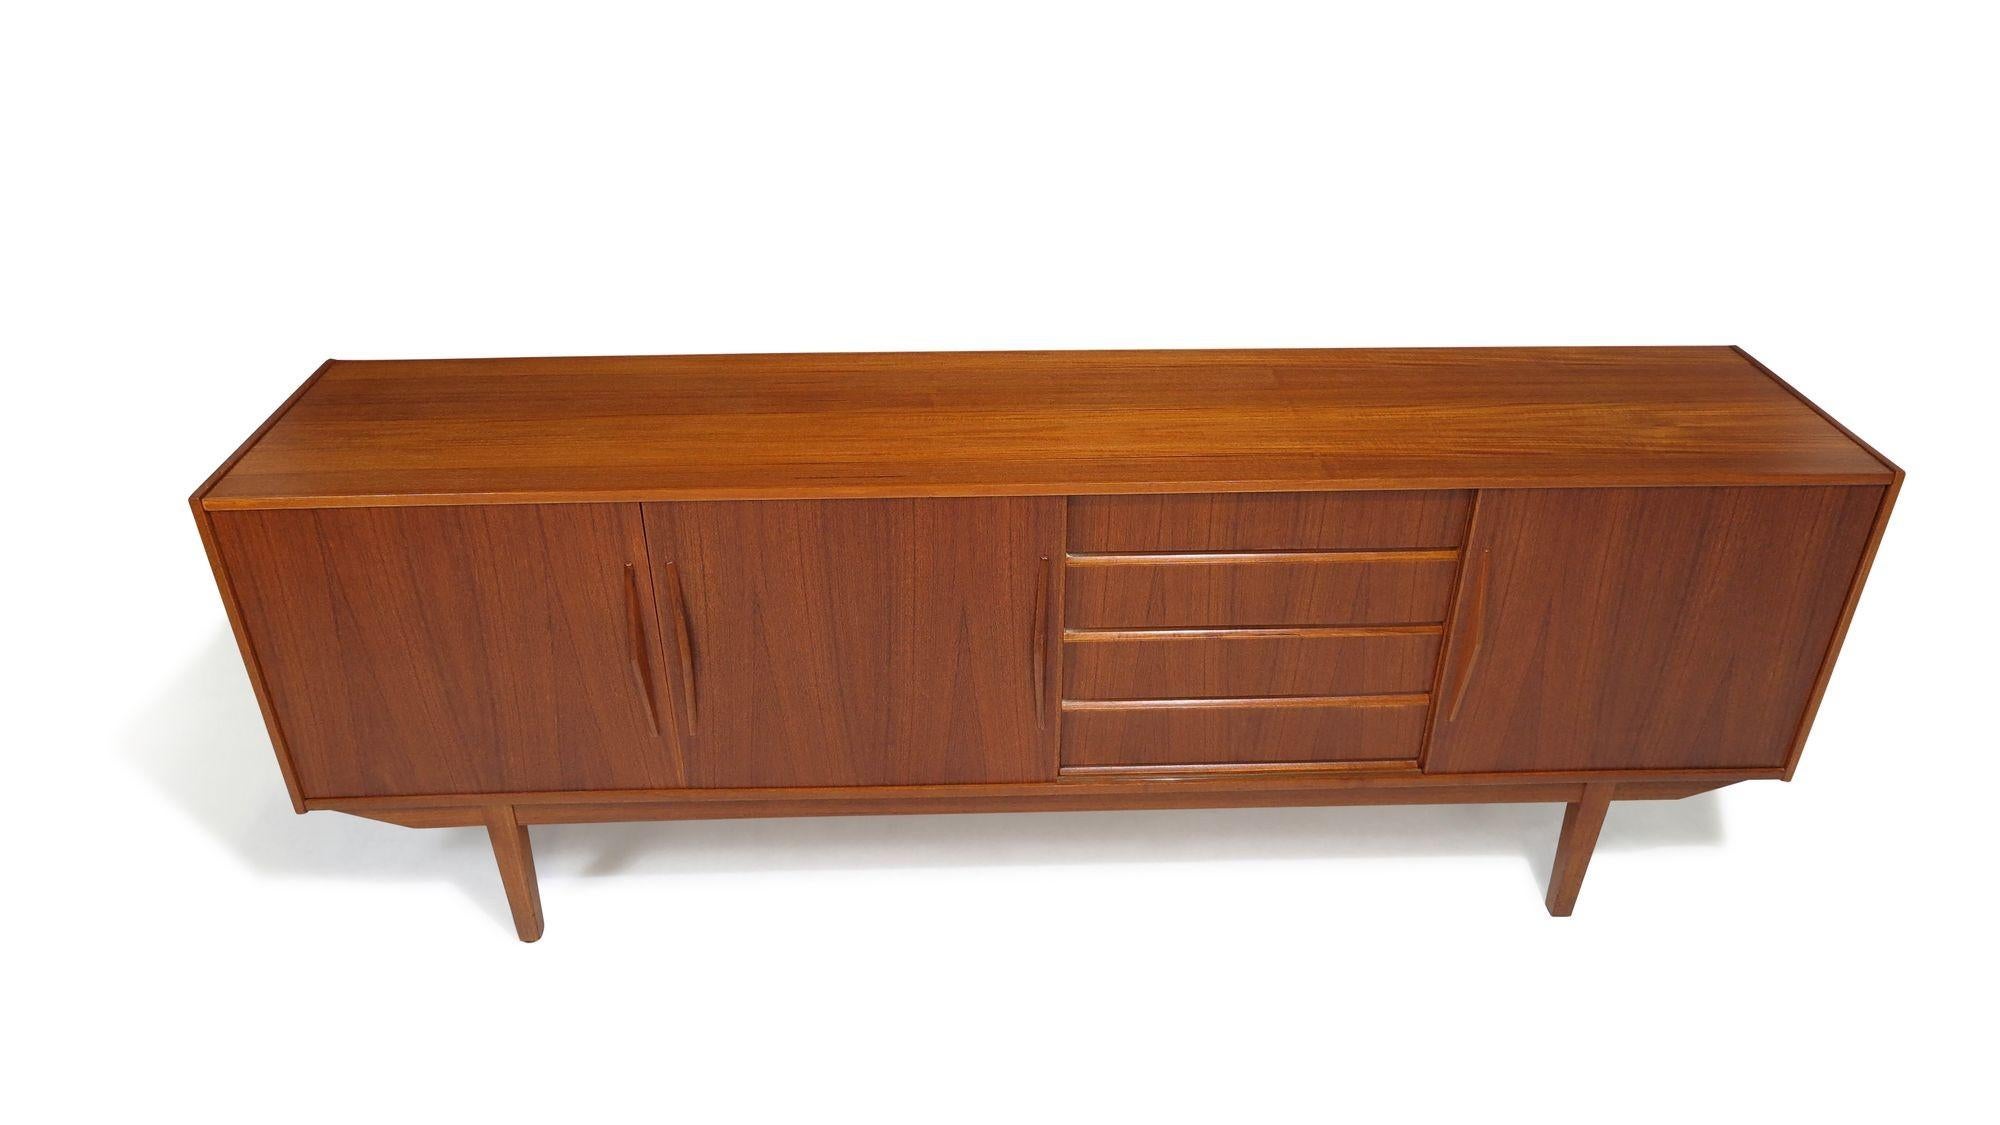 1960's Mid-century Danish Teak Credenza with Doors and Drawers For Sale 2